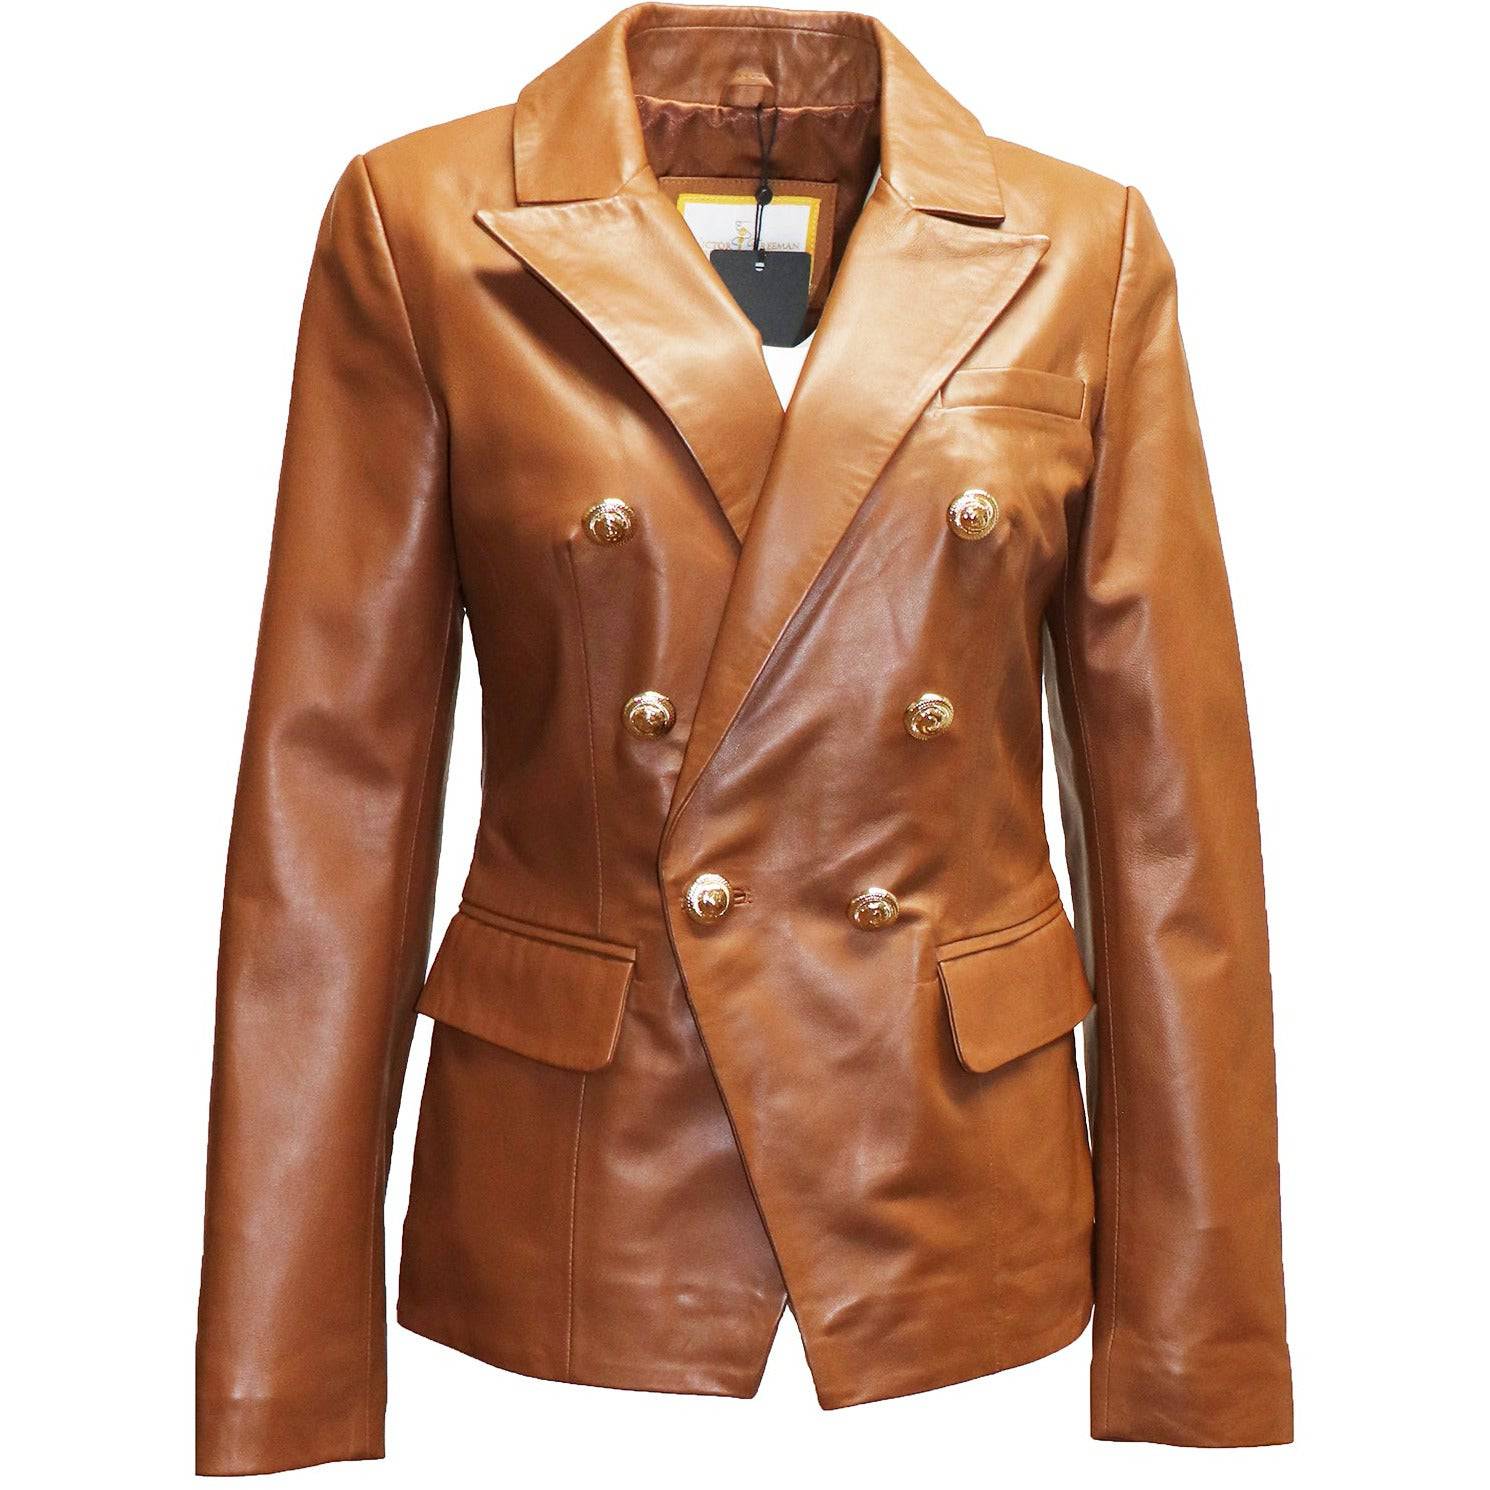 Victor Freeman Women's double Breasted Leather Blazer Jacket - Zooloo Leather